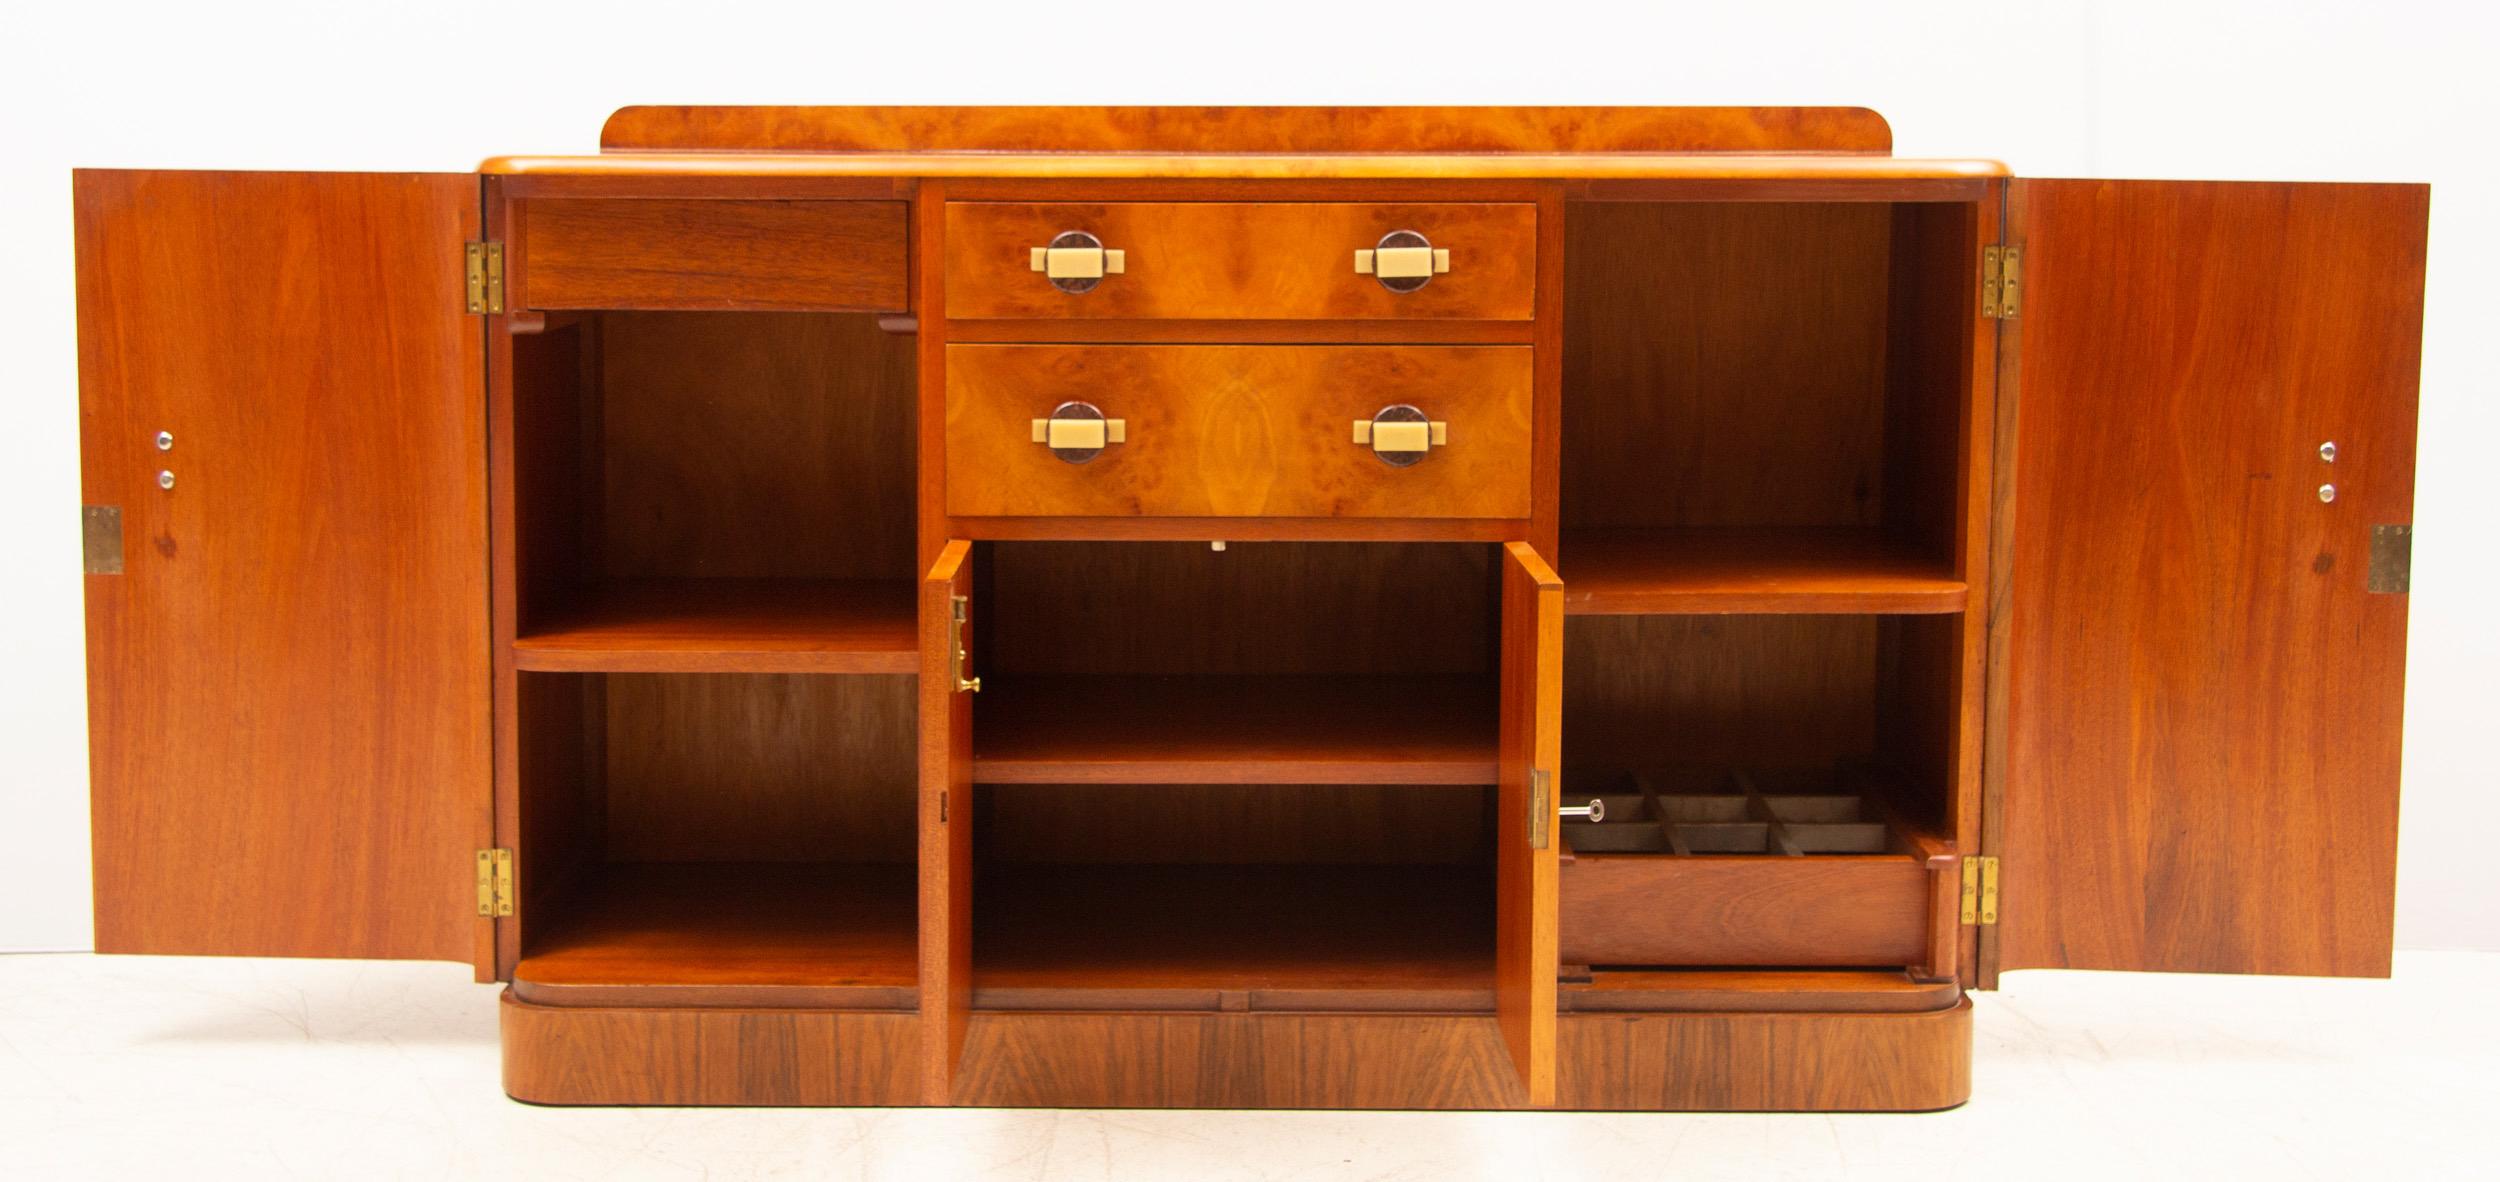 Art Deco sideboard credenza in a beautiful bird's-eye maple and walnut.
Irish Art Deco sideboard with Waterfall Edges & Bakelite handles.
Two large cupboard doors to flanks
Two central drawers above small central cupboard section
Internal